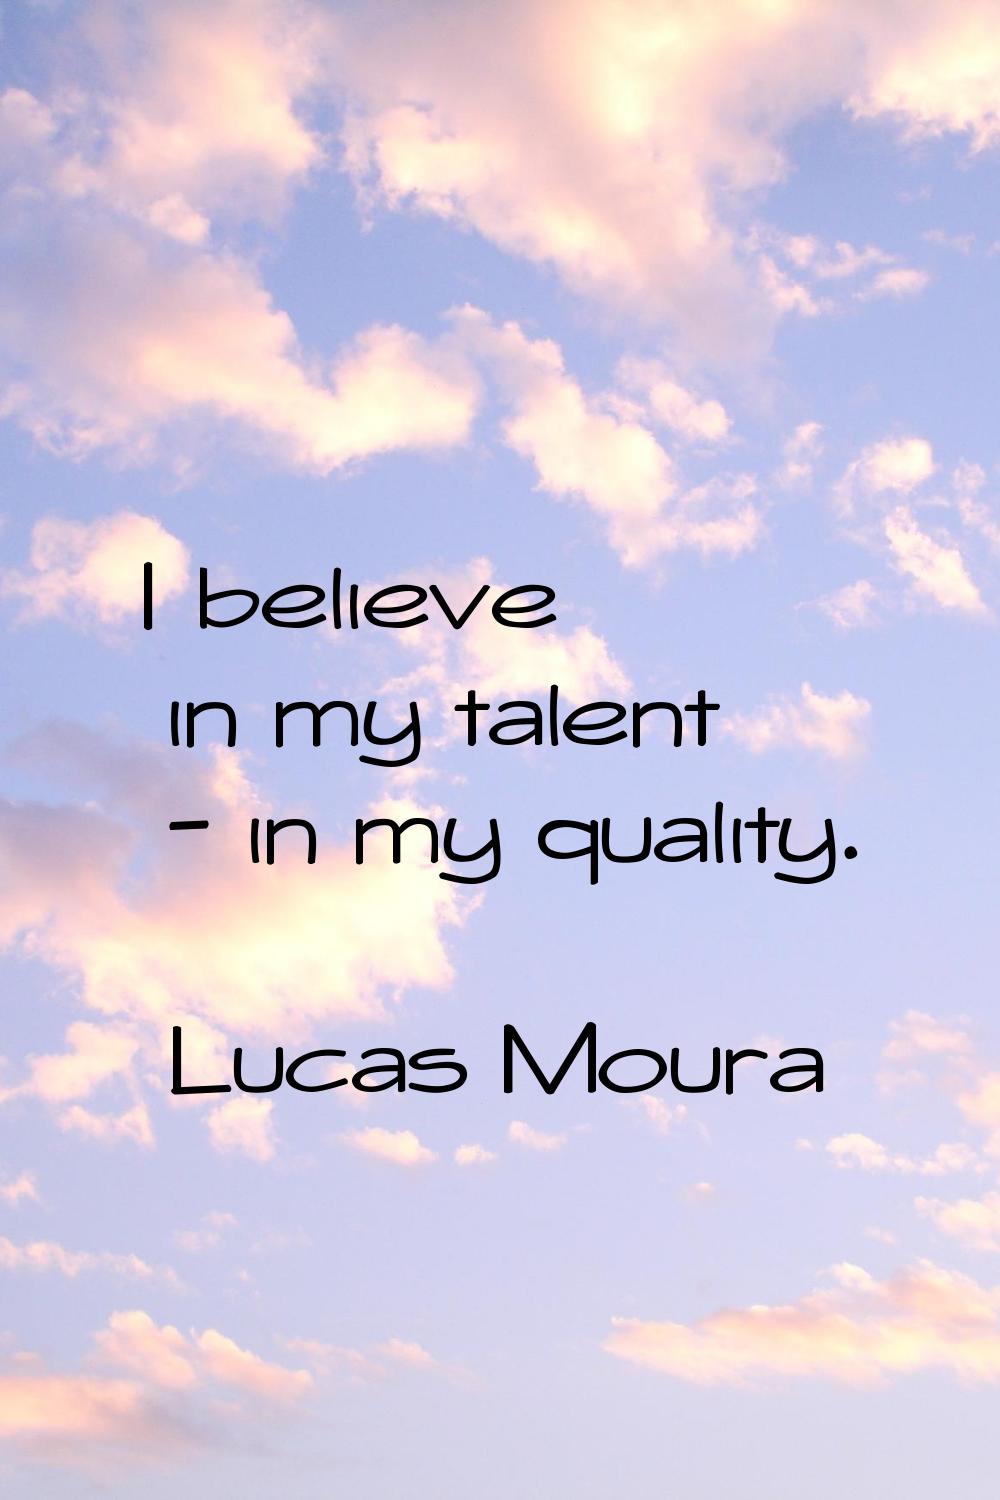 I believe in my talent - in my quality.